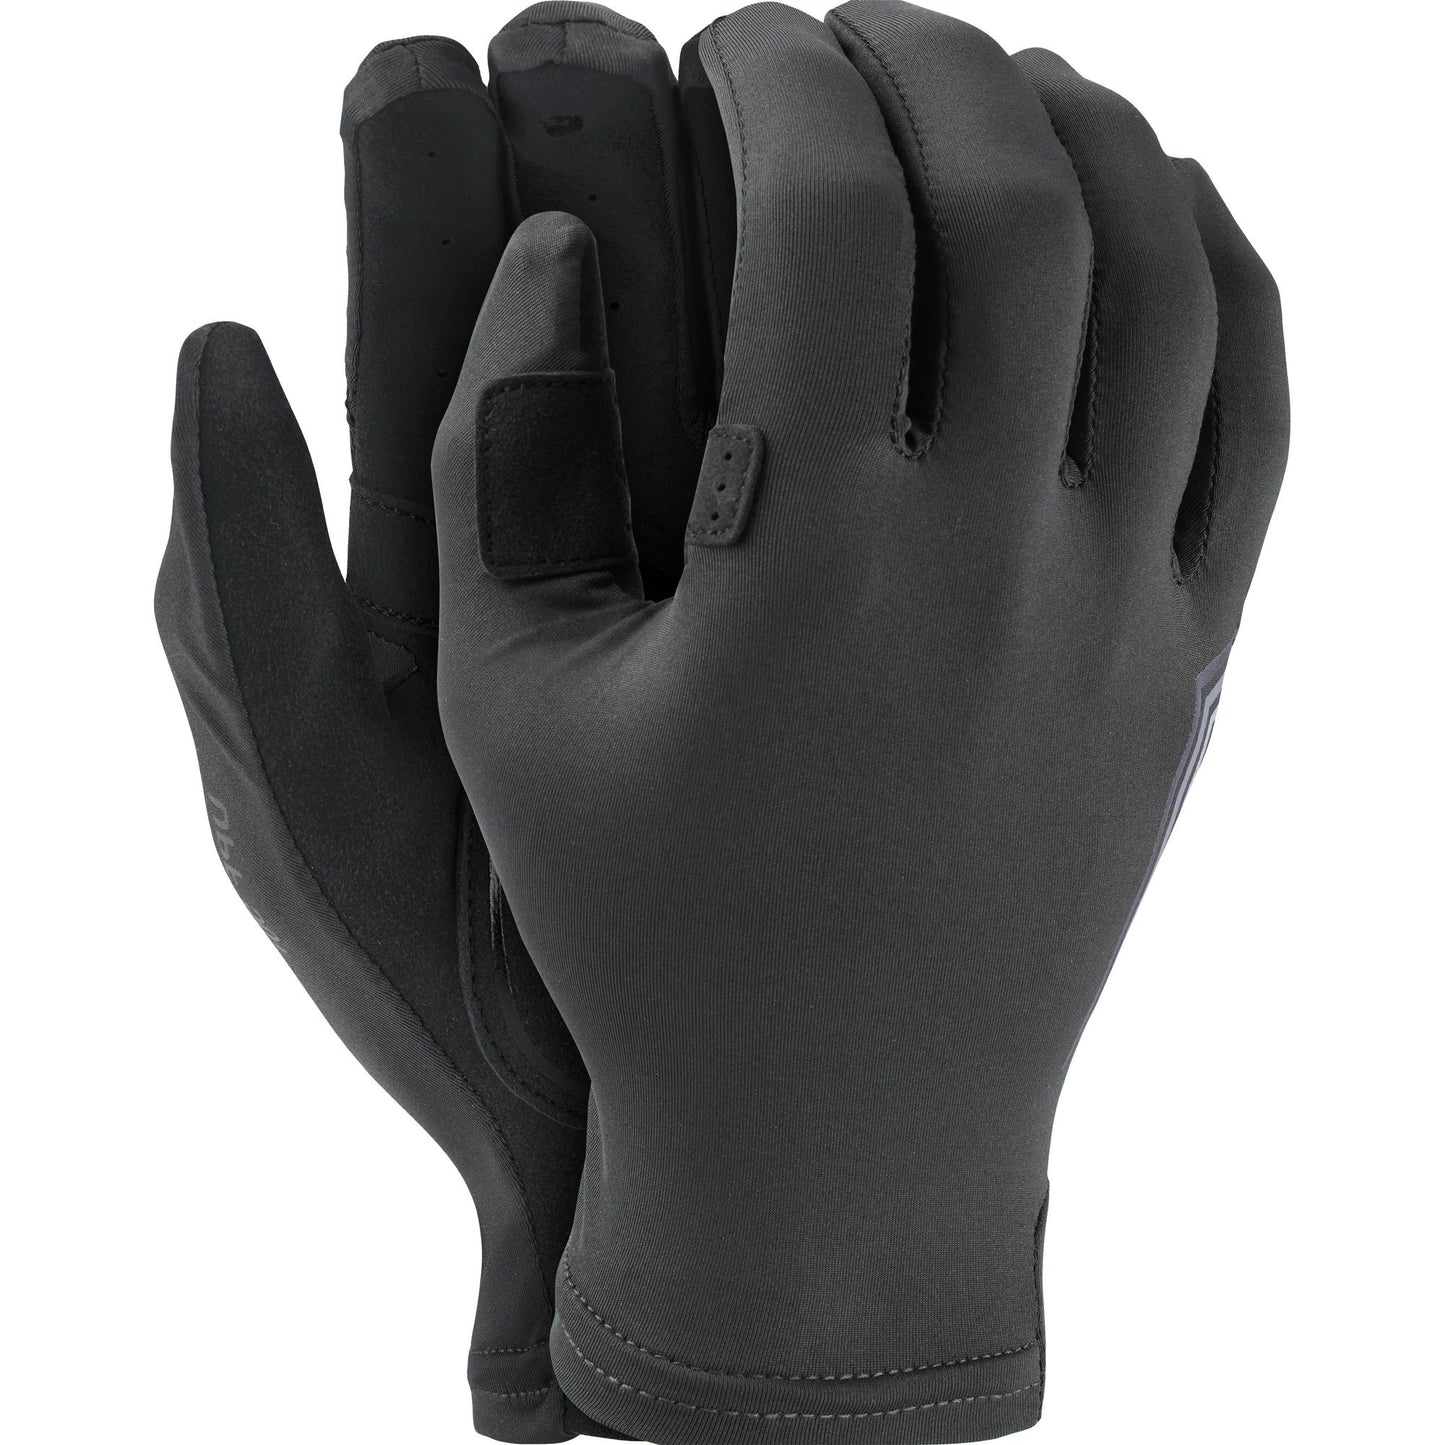 A pair of black NRS Cove gloves on a white background.